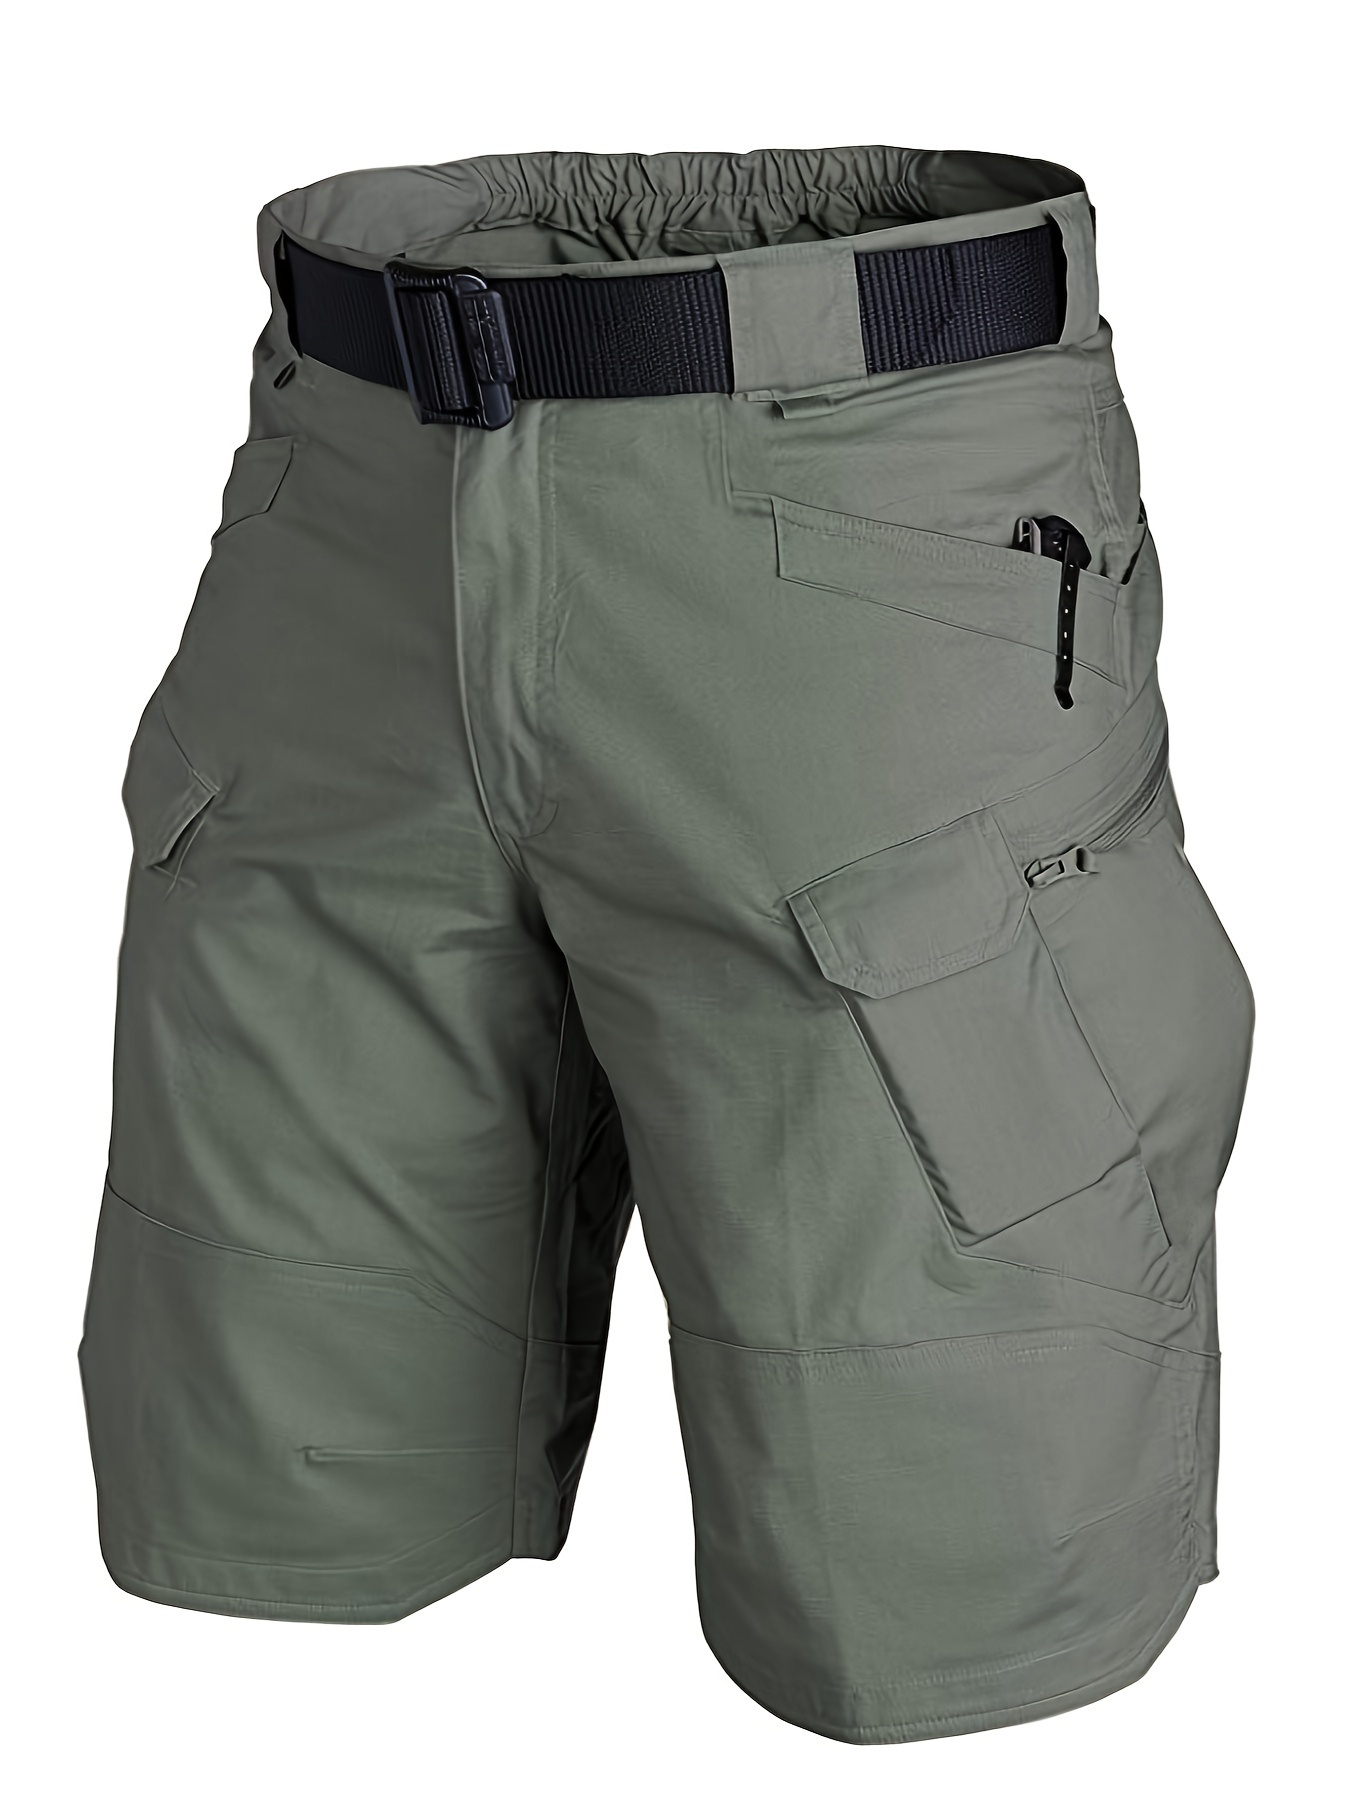 Men's Hiking Cargo Shorts Elastic Waist Tactical Work Shorts Lightweight  Casual Fishing Shorts for Men with 6 Pockets